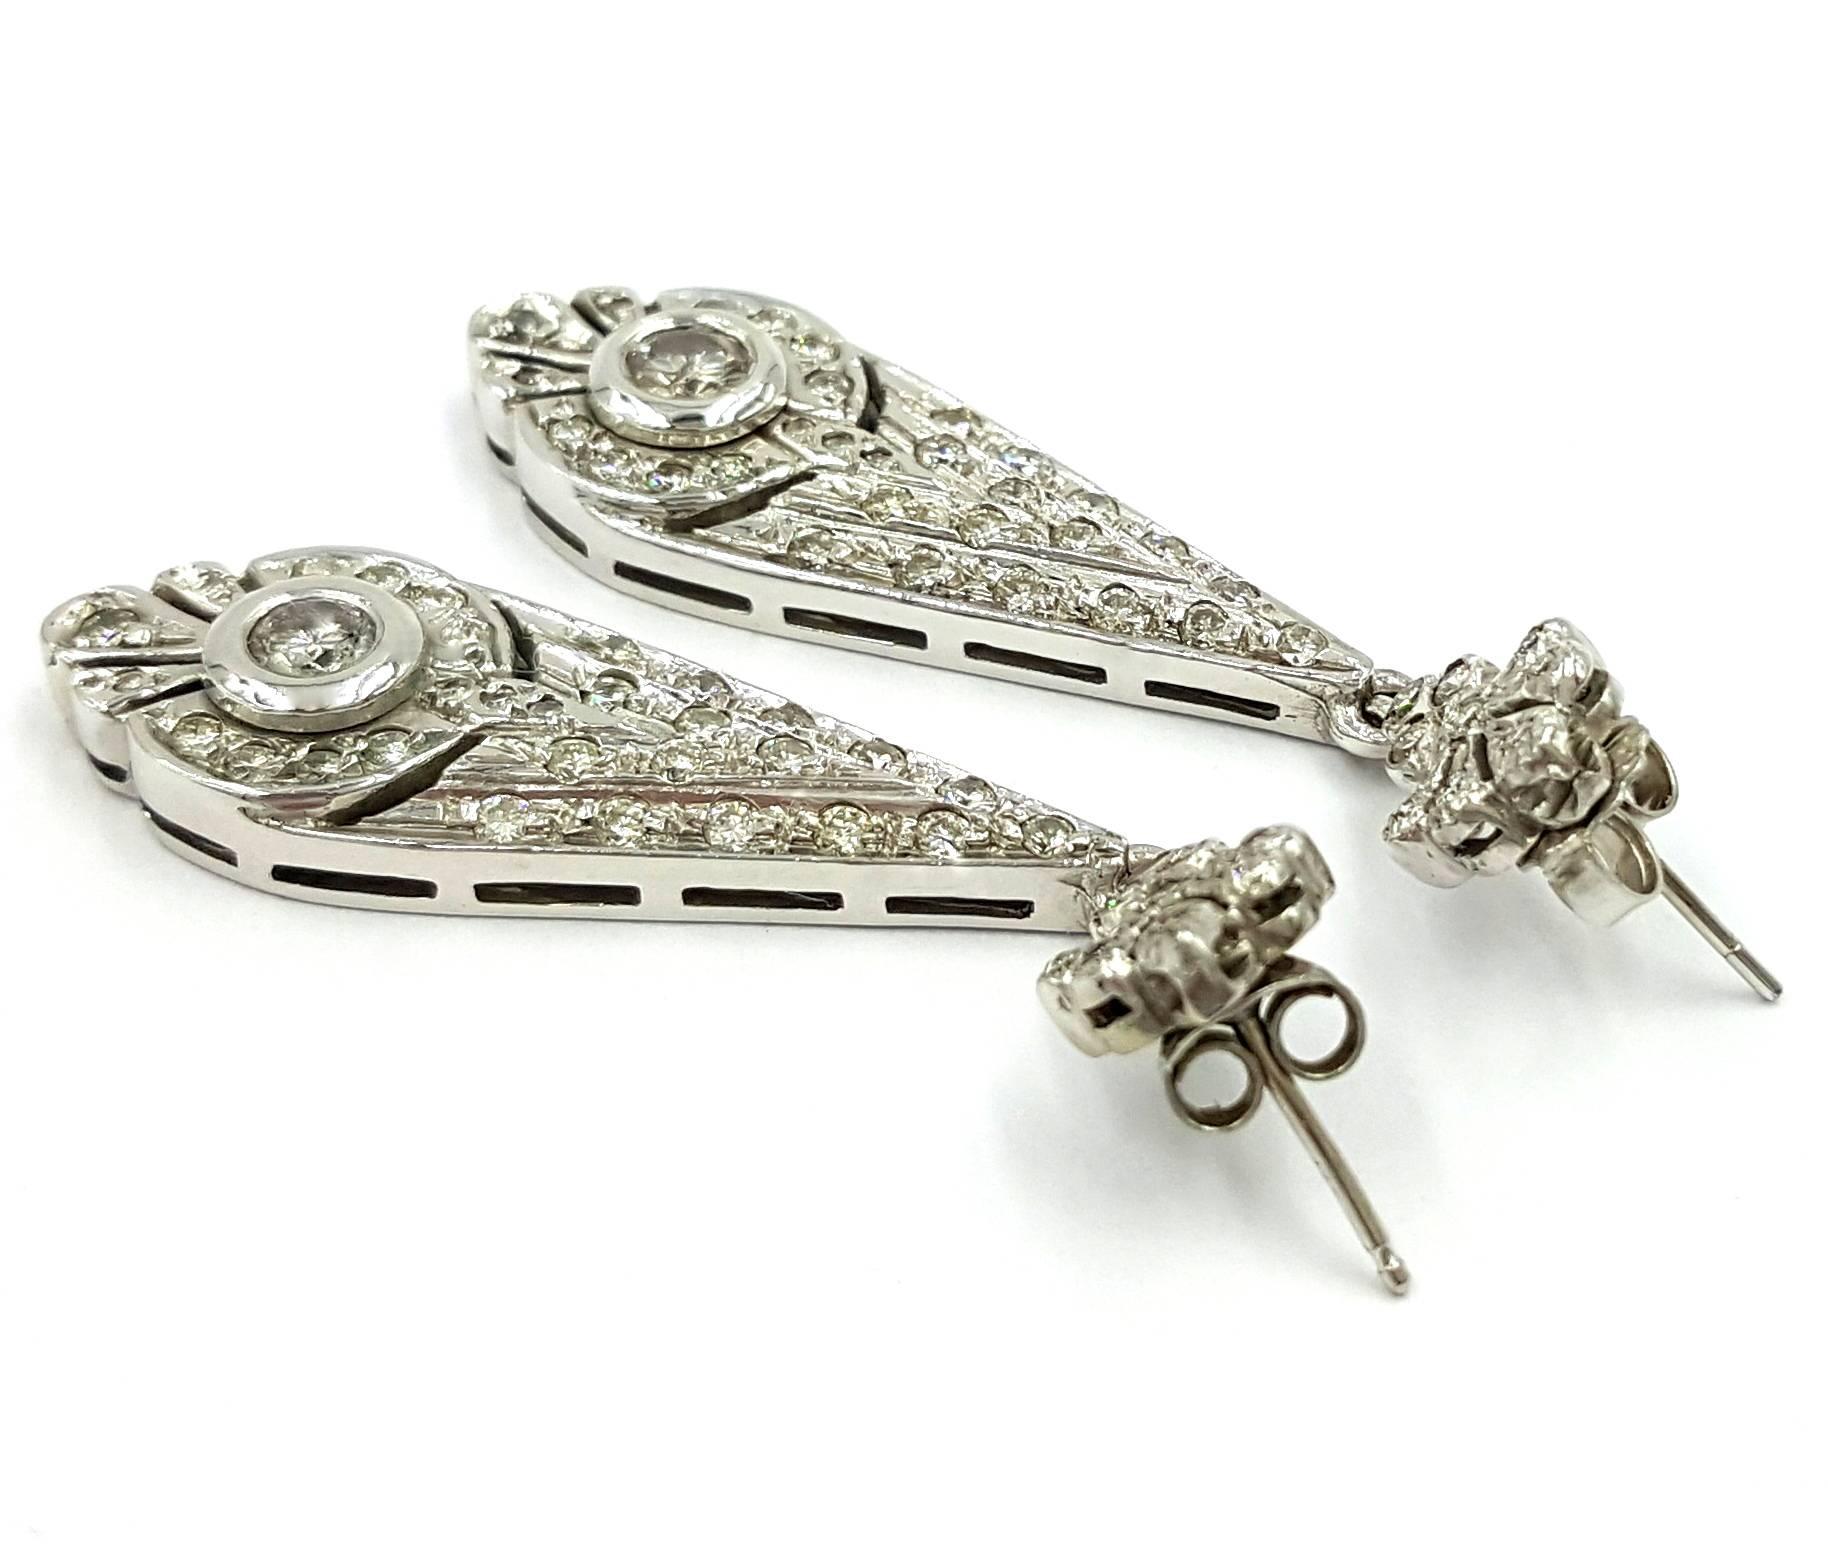 These absolutely bedazzling Retro 1950's Earrings are dripping in diamonds. Hand made during the 1940's to 1950's with incredible hand craftsmanship and precision. We start at the top of the earrings with a gorgeous organic flowing floral design